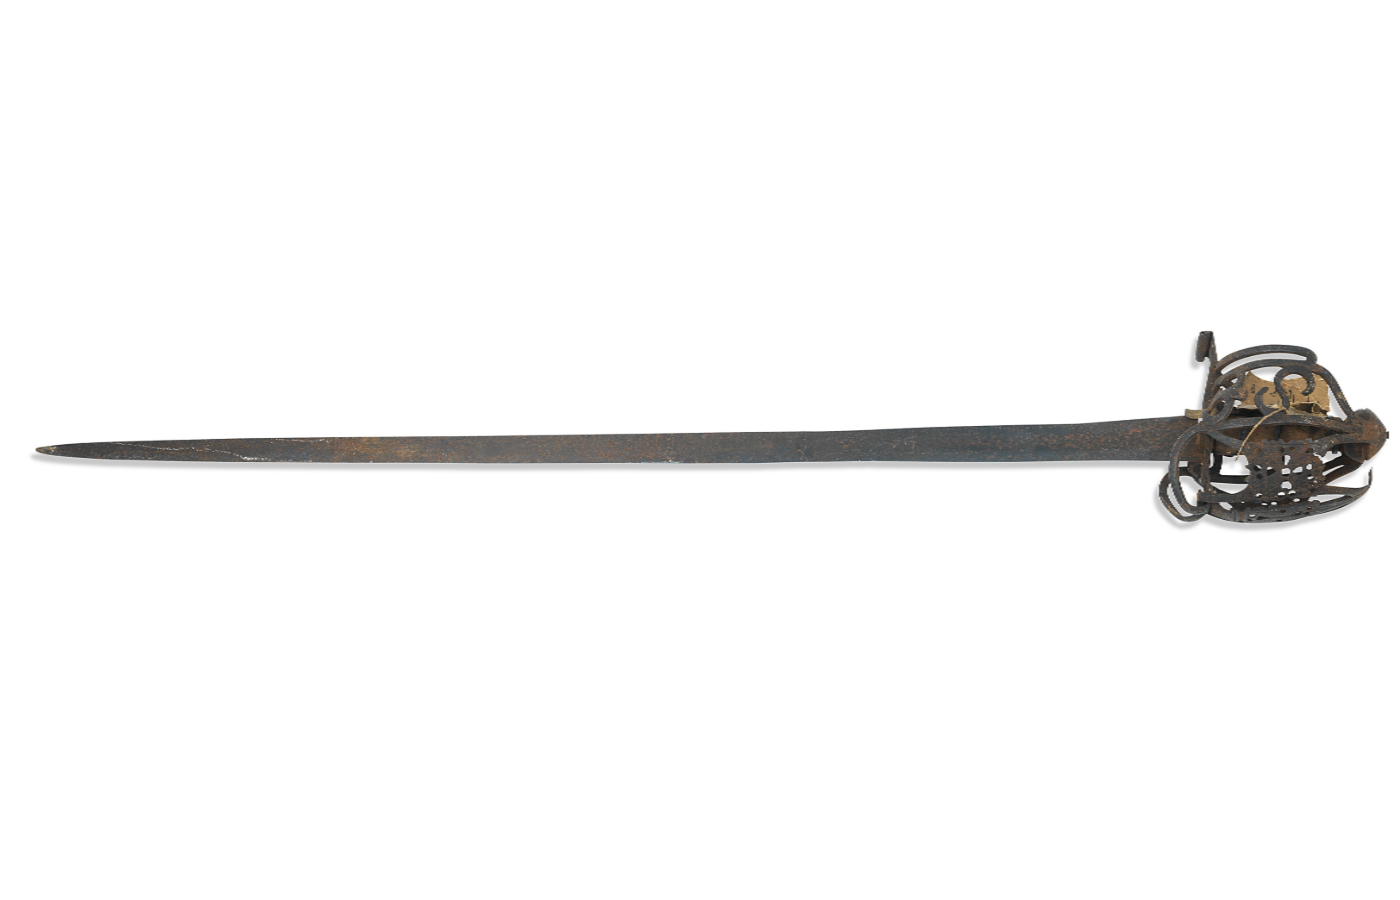 An 18th Century basket-Hilted Broadsword found on Culloden Moor.